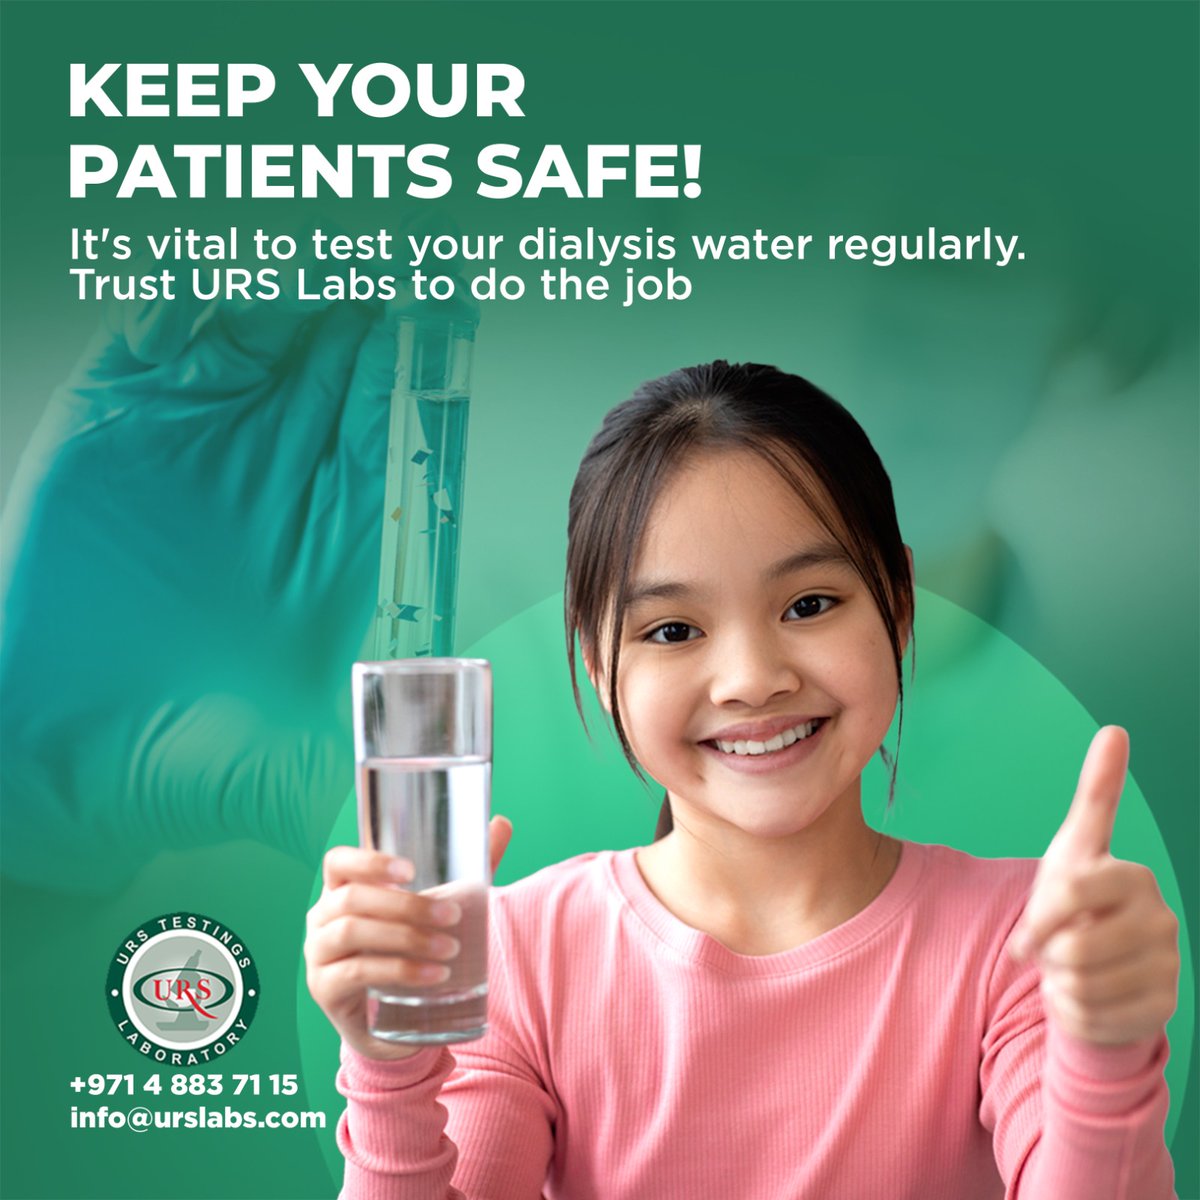 Make sure the dialysis water used for patients is free of toxins and chemicals with URS Labs 

#Dialysissafety #URSLabs #HealthSafetyFirst #WaterTesting #PatientSafety #dialysis #safetyfirst #DialysisWaterAnalysis